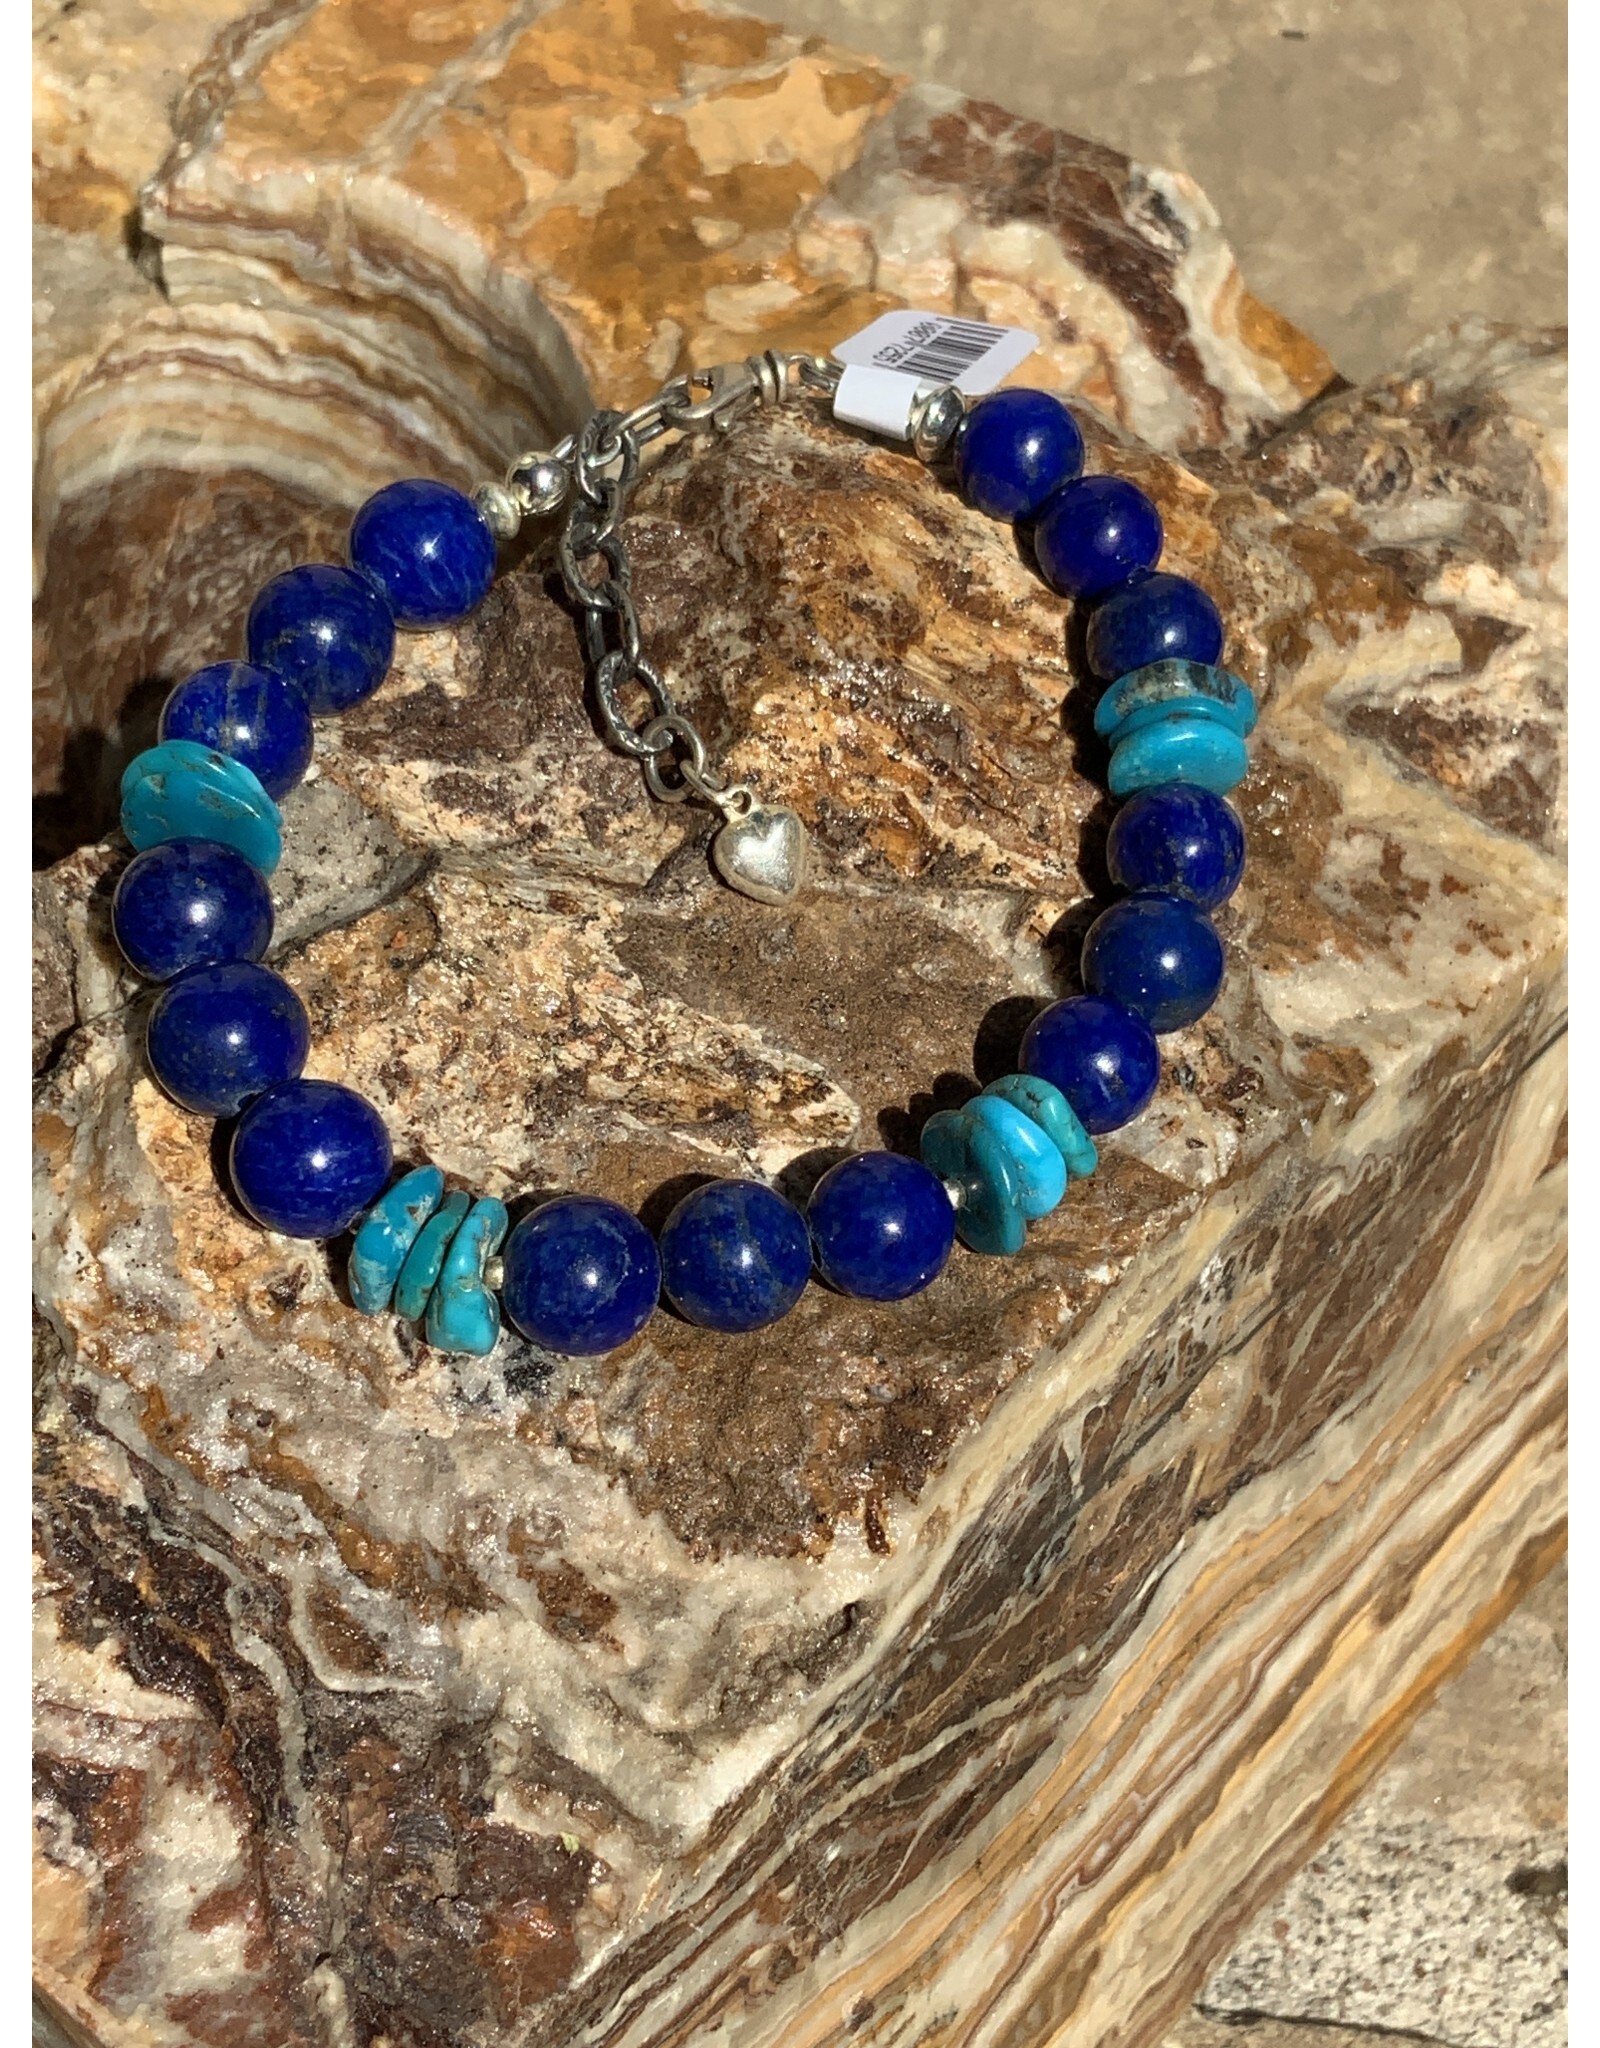 Annette Colby - Jeweler Bracelet Sleeping Beauty Turquoise Lapis and SS Beads and Clasp - AC